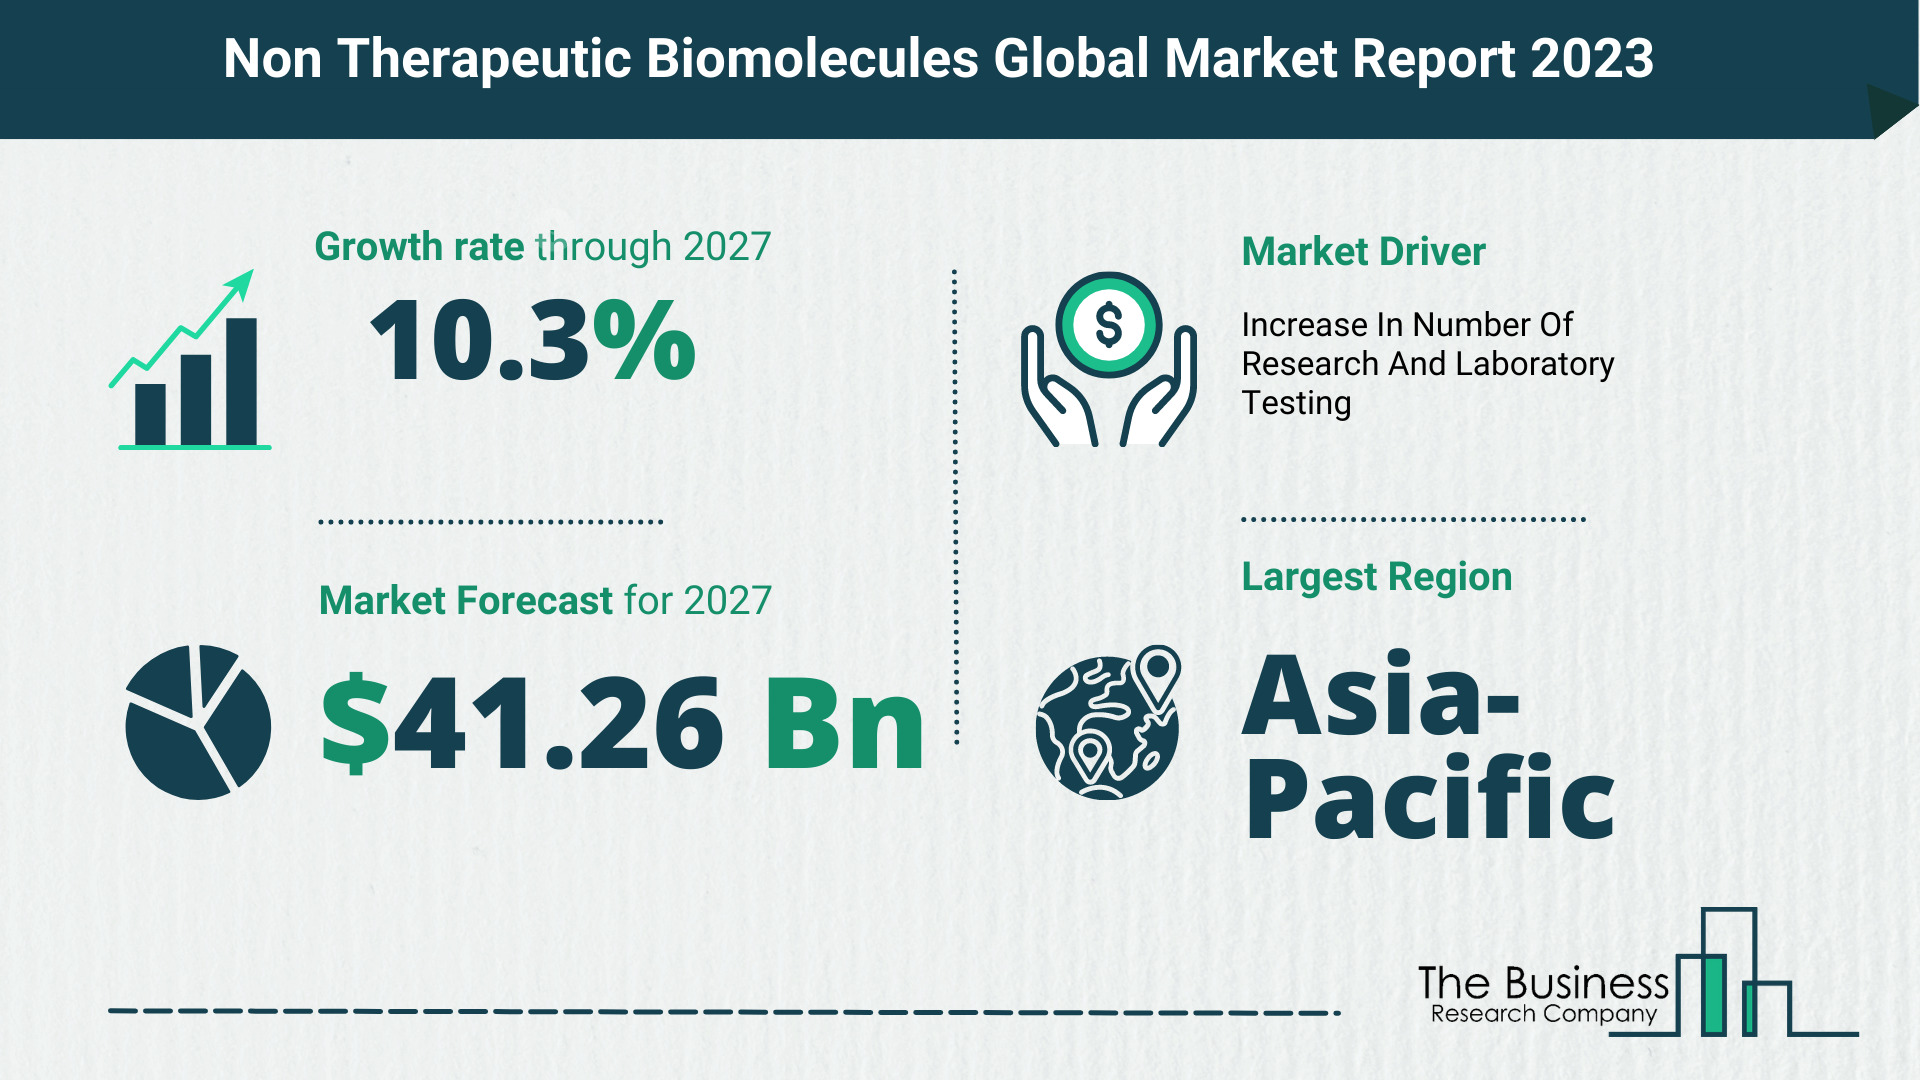 Non Therapeutic Biomolecules Market Size, Share, And Growth Rate Analysis 2023